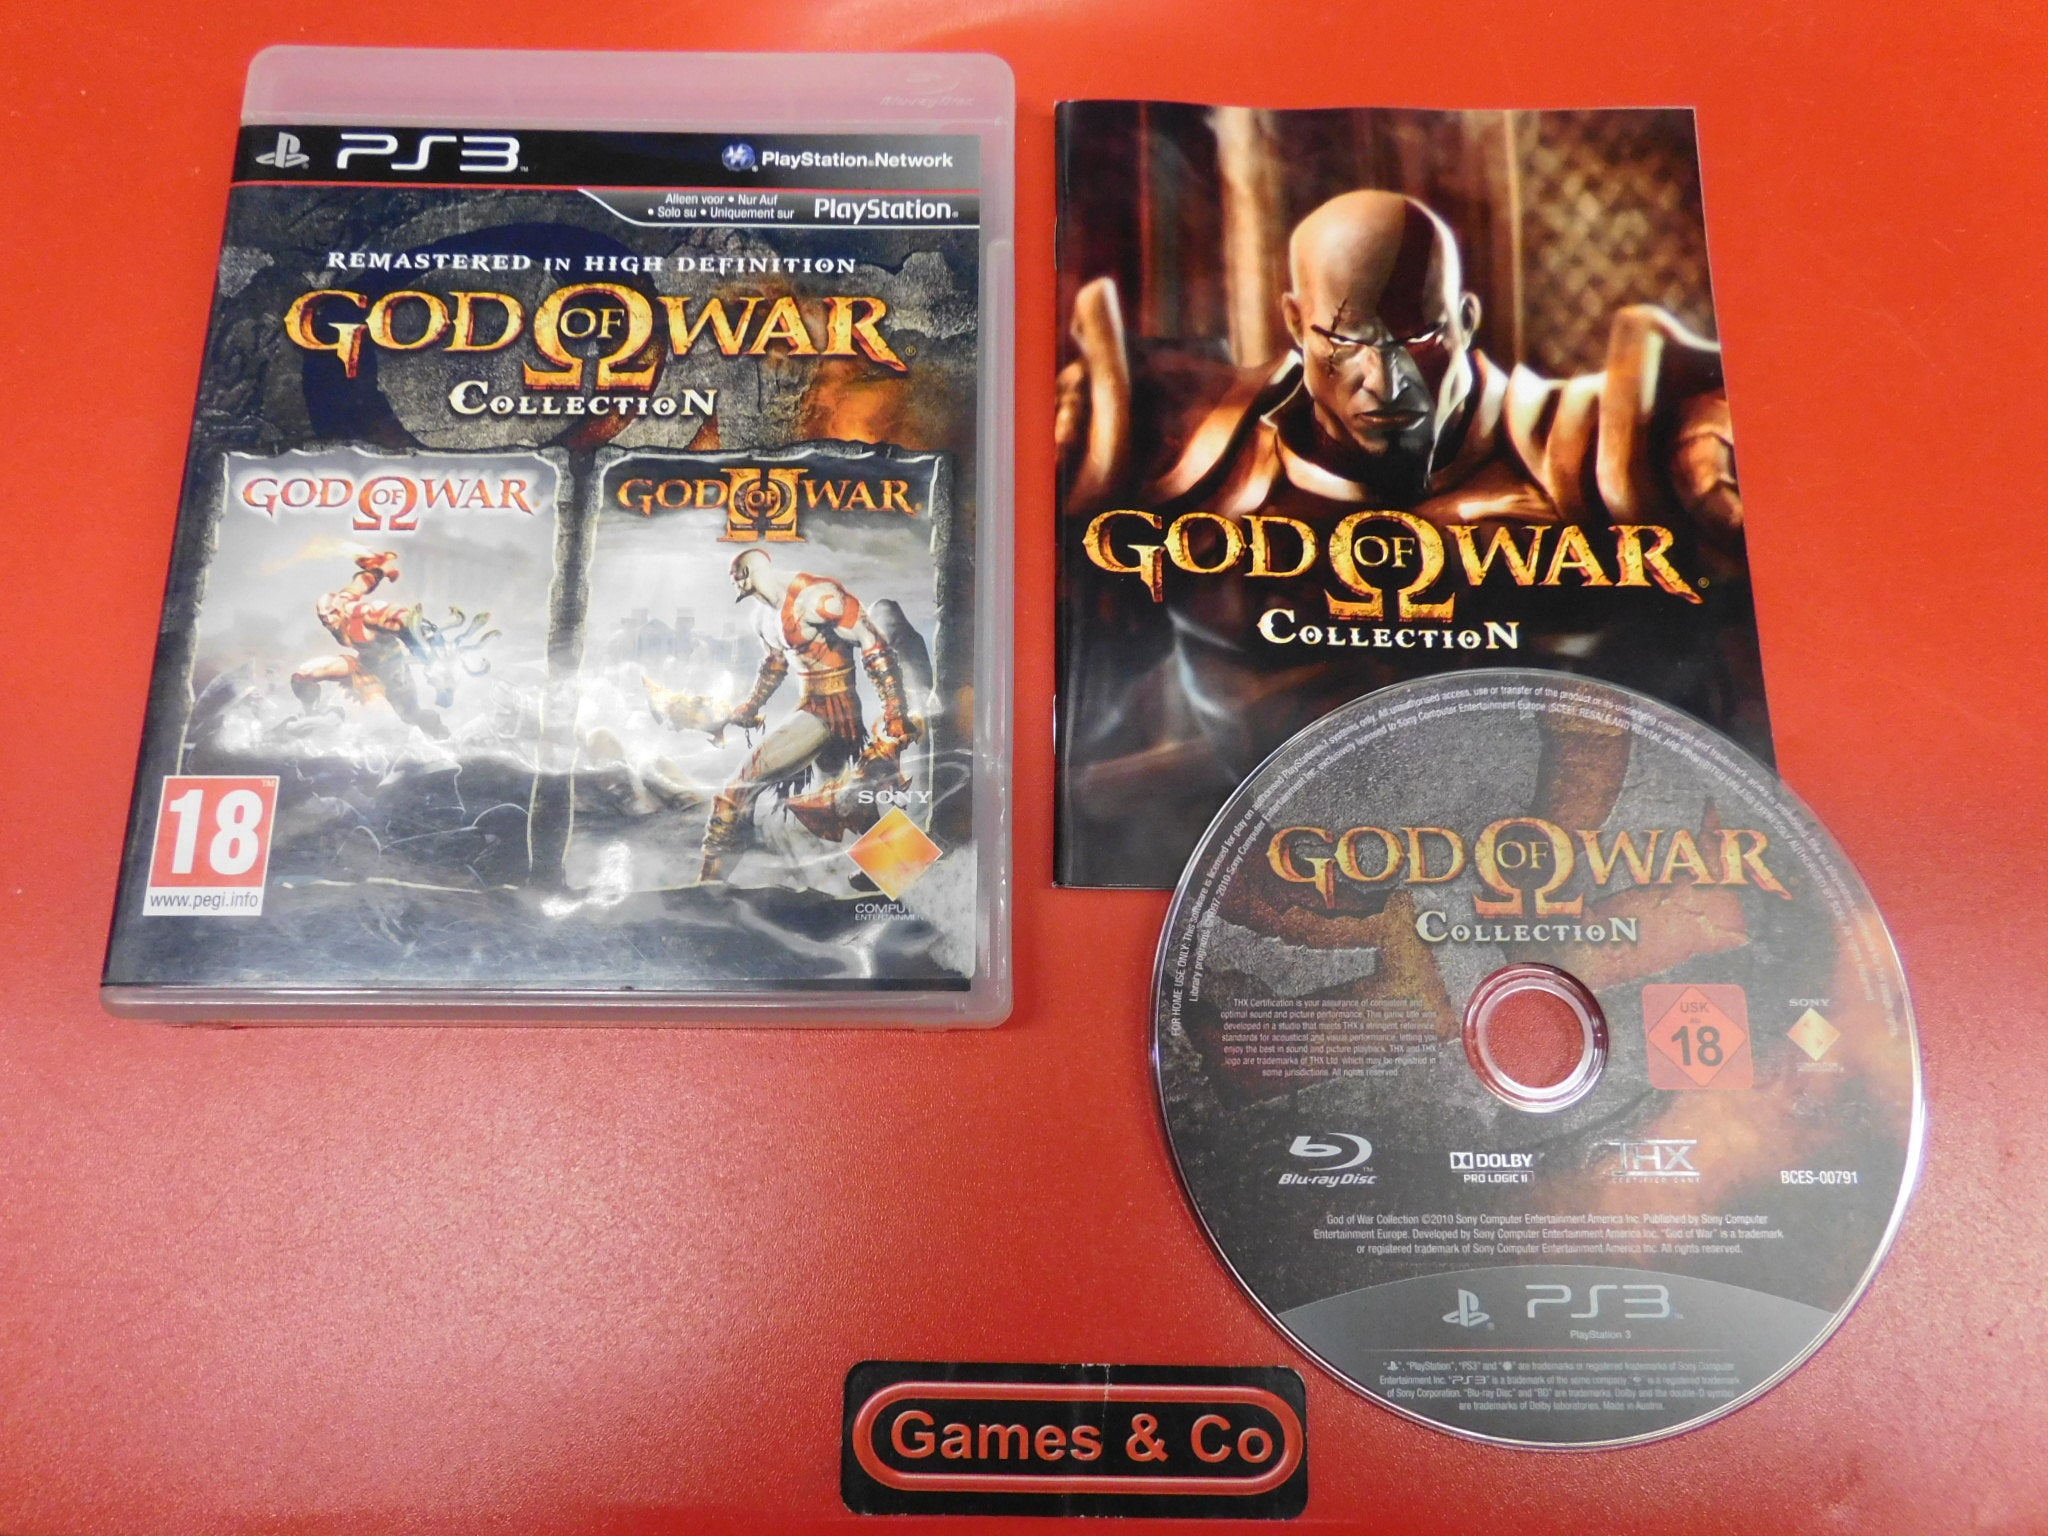 GOD OF WAR COLLECTION